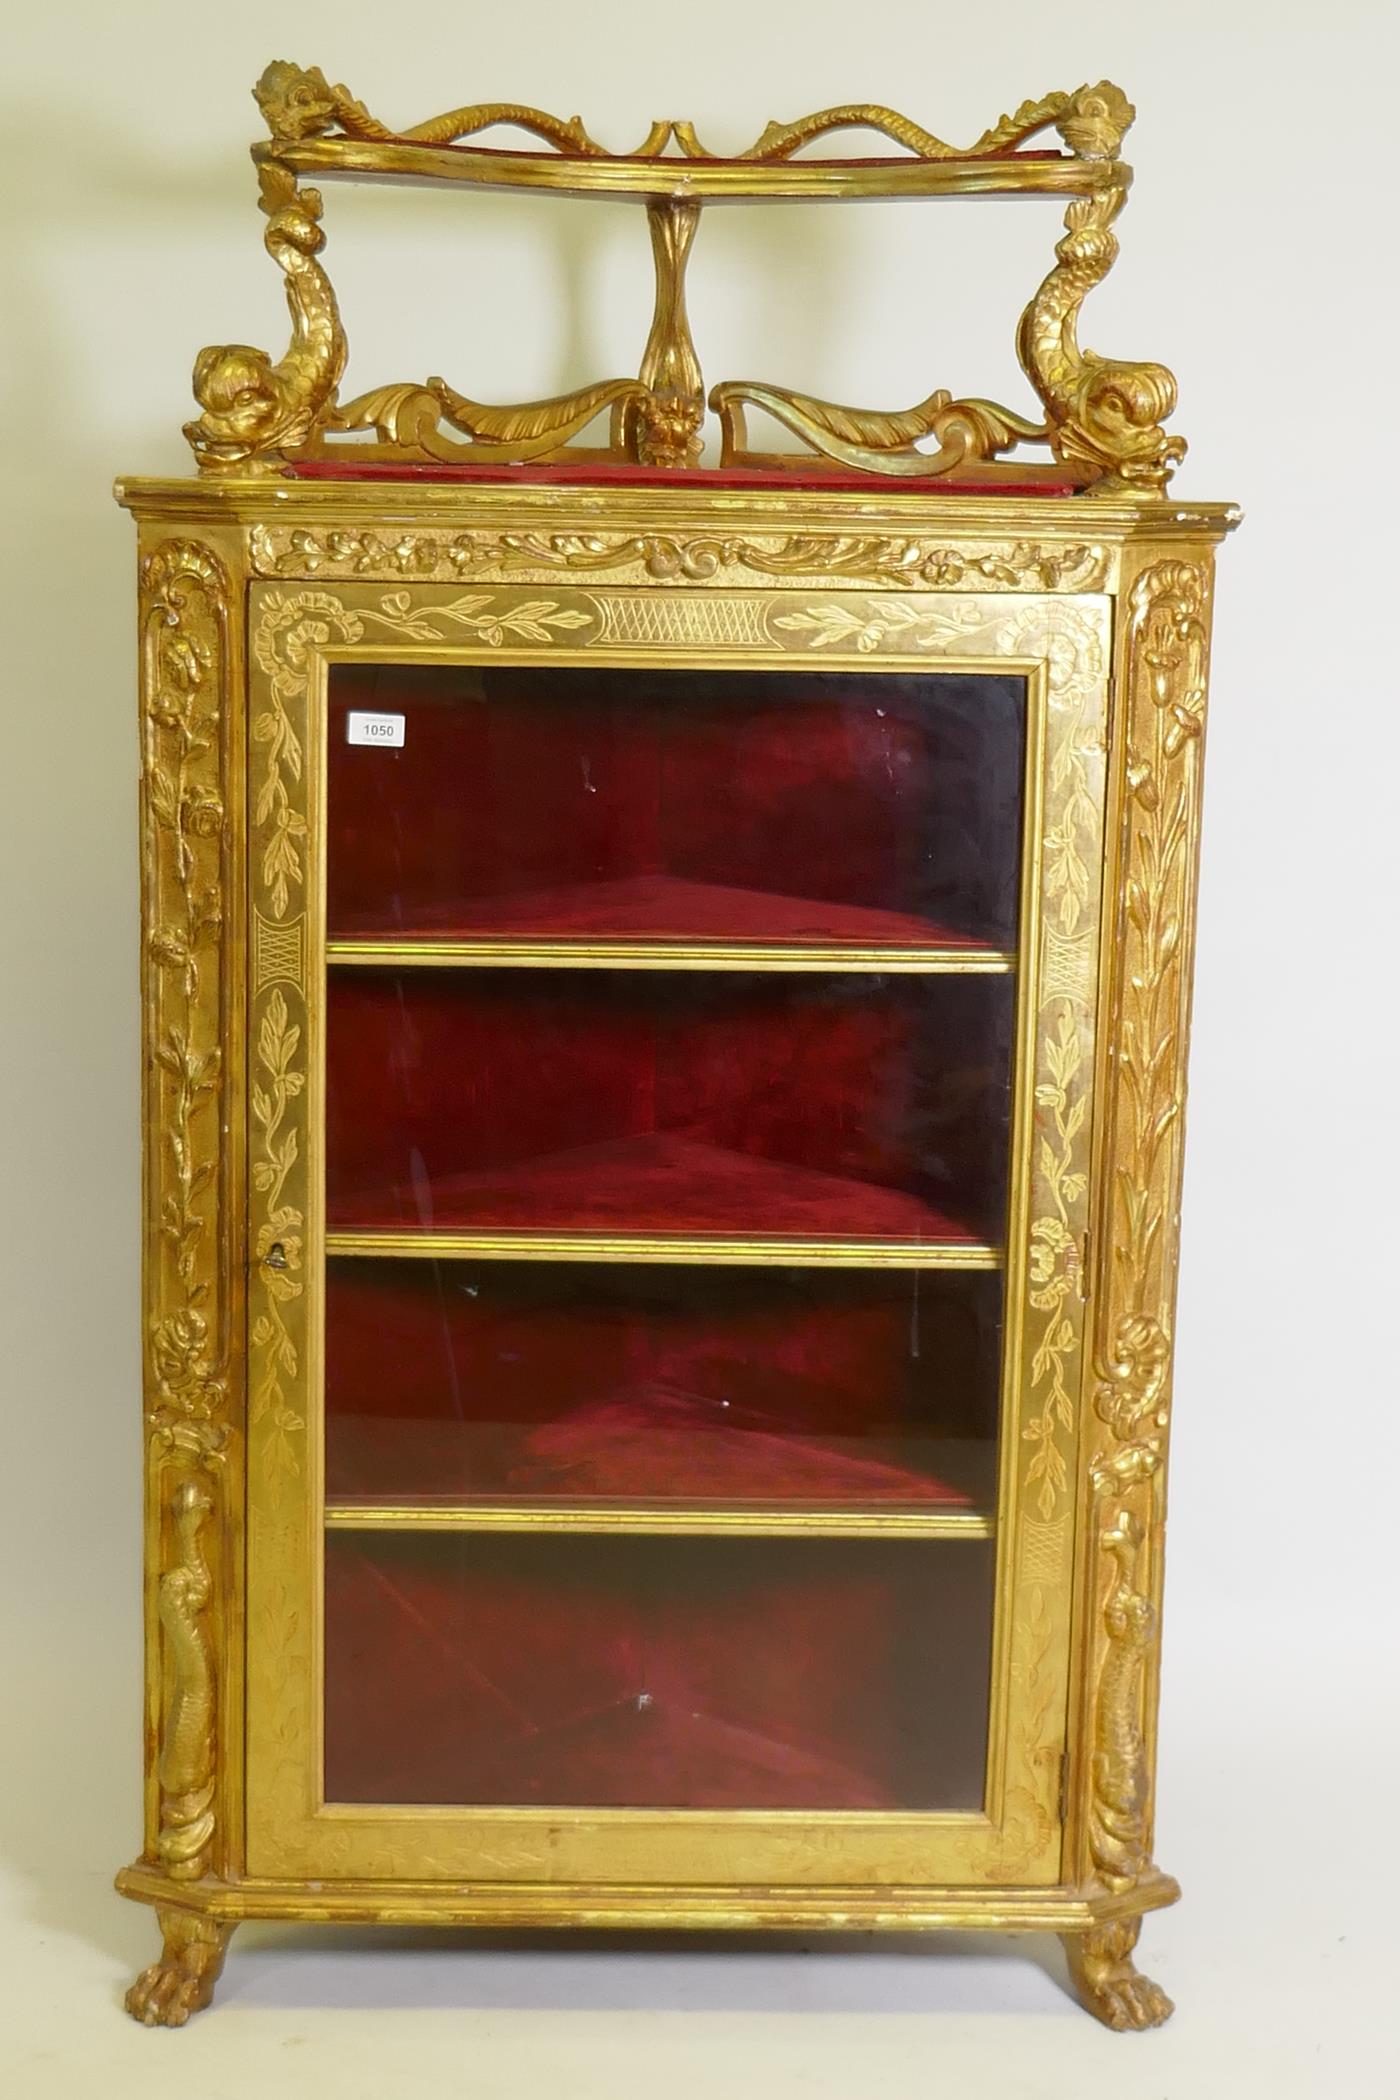 A C19th Italian giltwood corner cabinet, the top with an open shelf supported by dolphins, the - Image 2 of 11